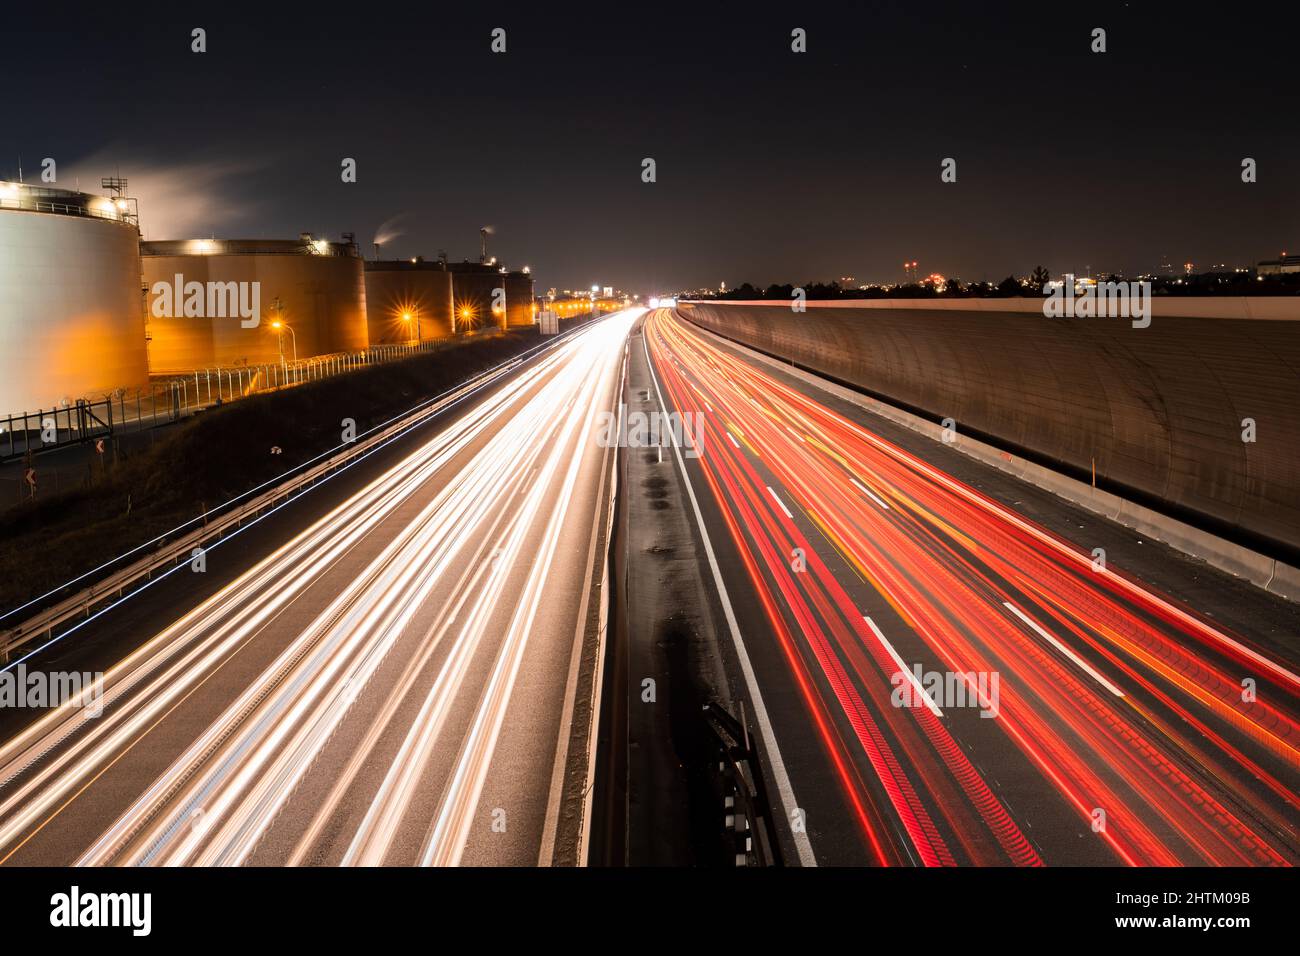 Light trails of car traffic on a highway next to industry buildings and a noise barrier at night, postcard calender idea concept Stock Photo